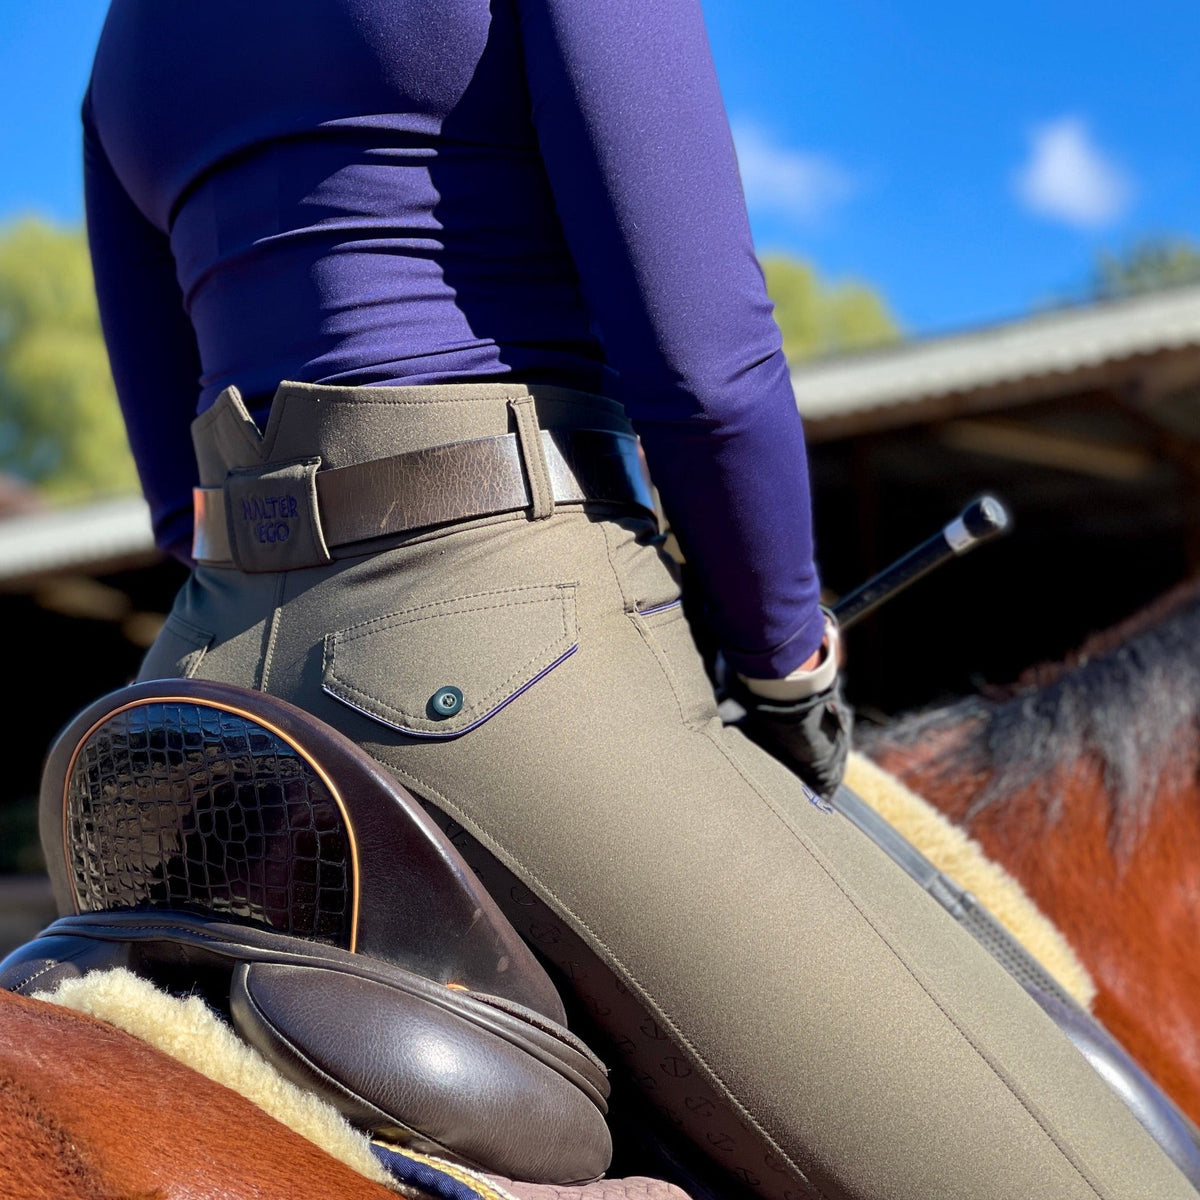 Perfection 2.0 - Olive Green with Navy Piping High Waist Full Seat Breeches